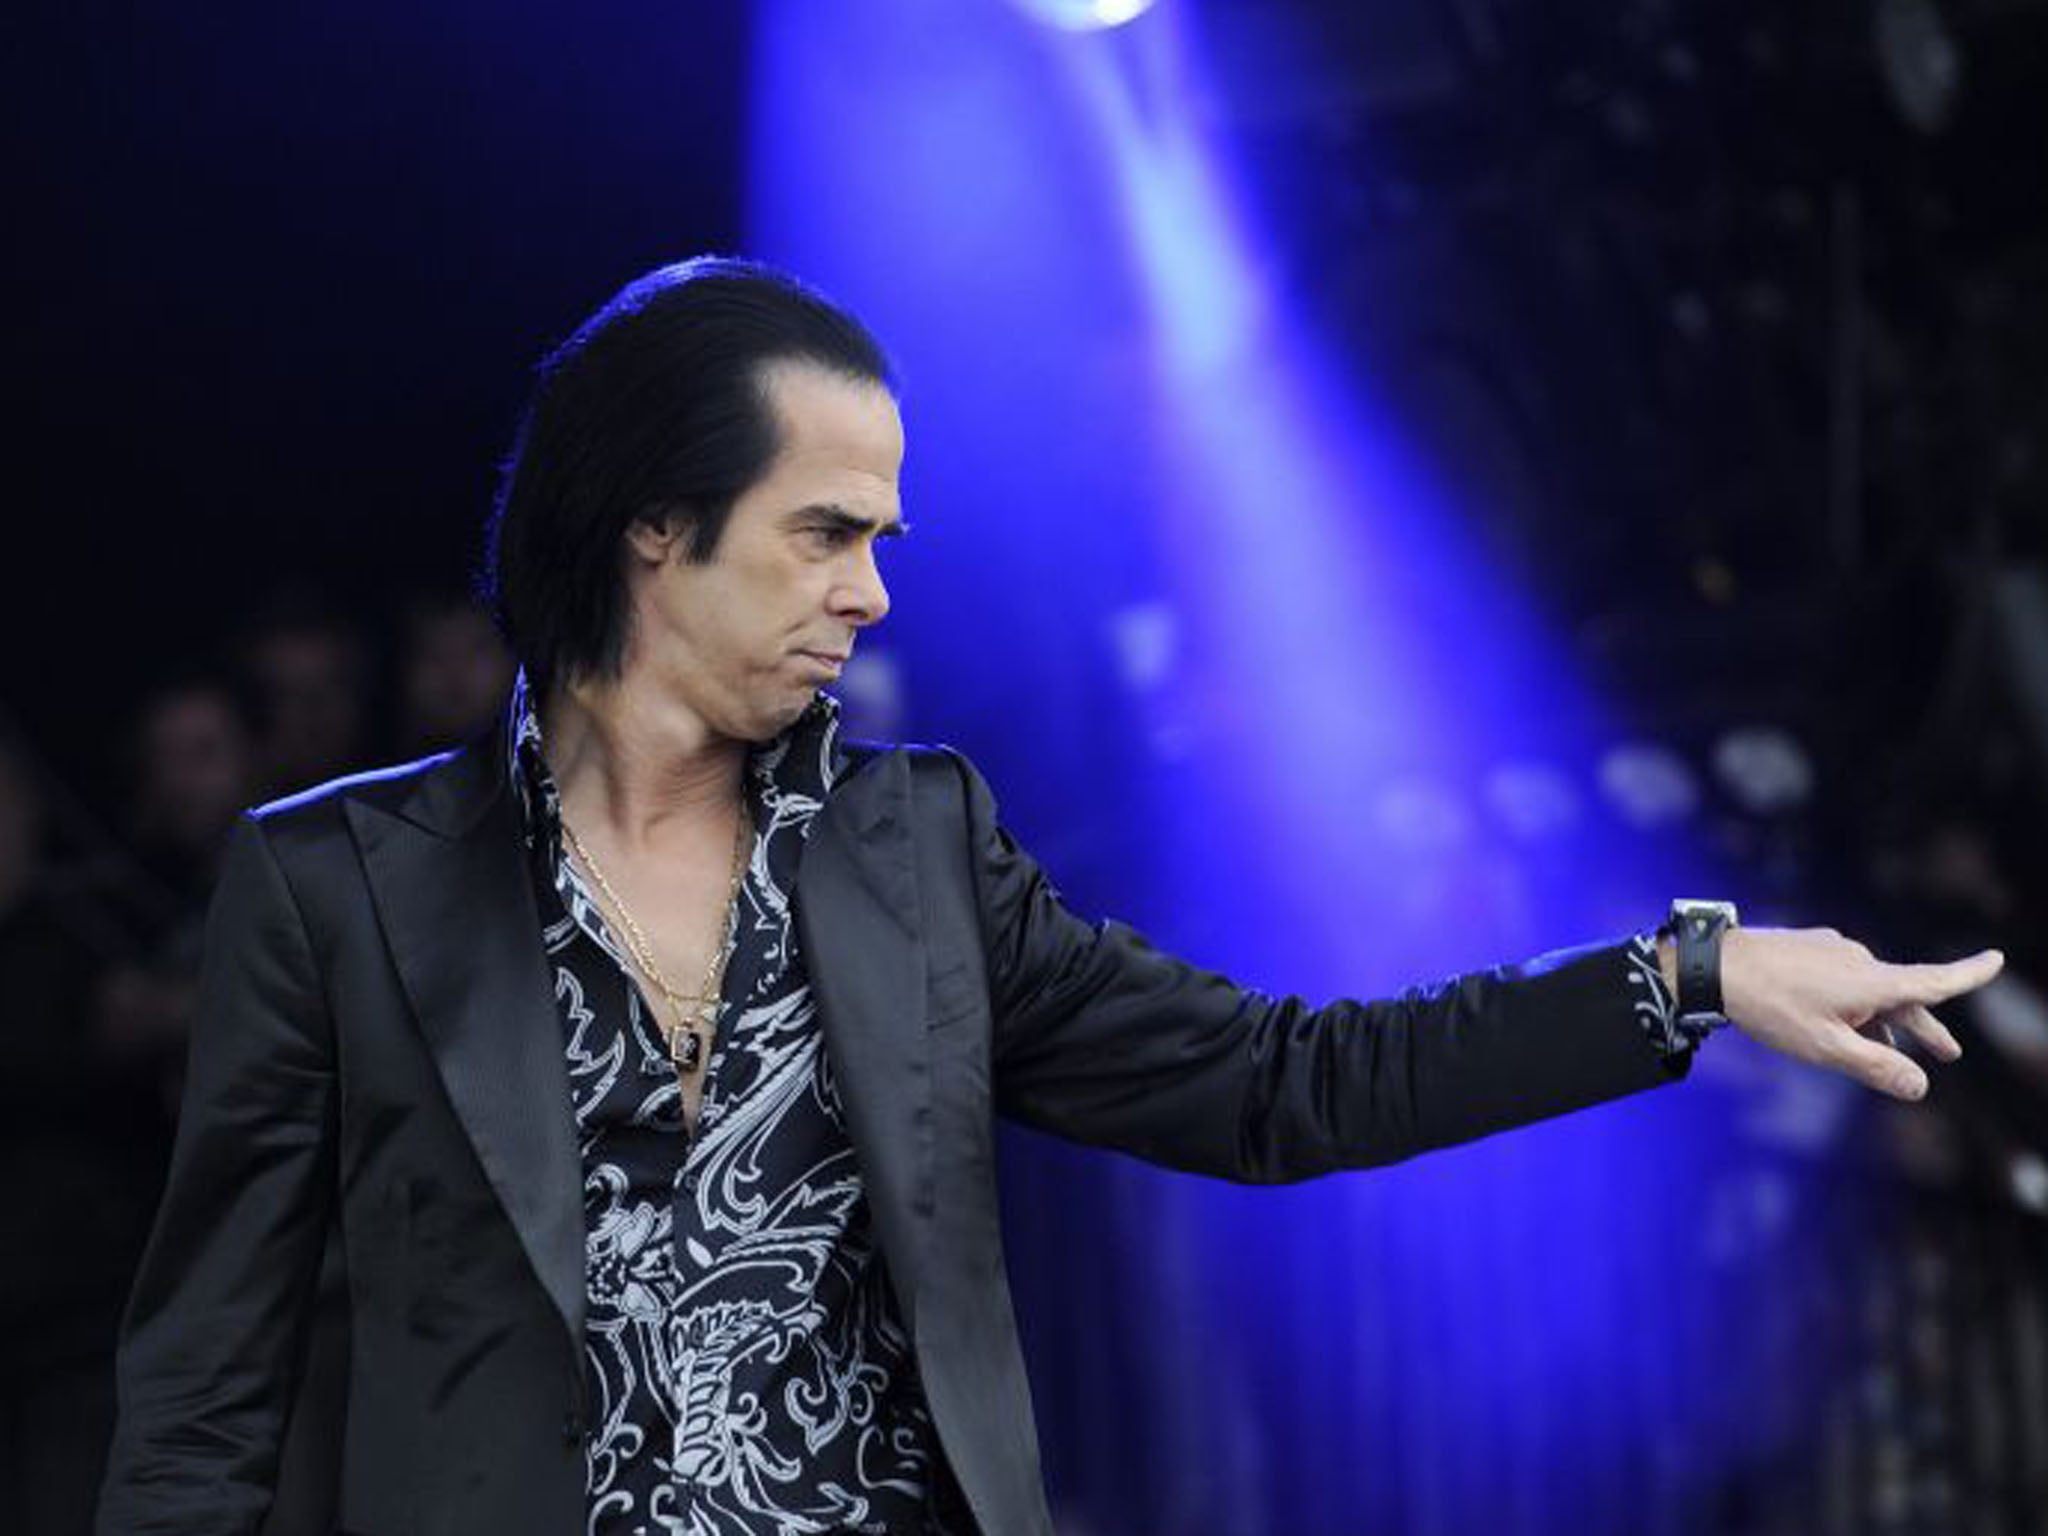 Nick Cave stares into the crowd as he performs with his bad the Bad Seeds